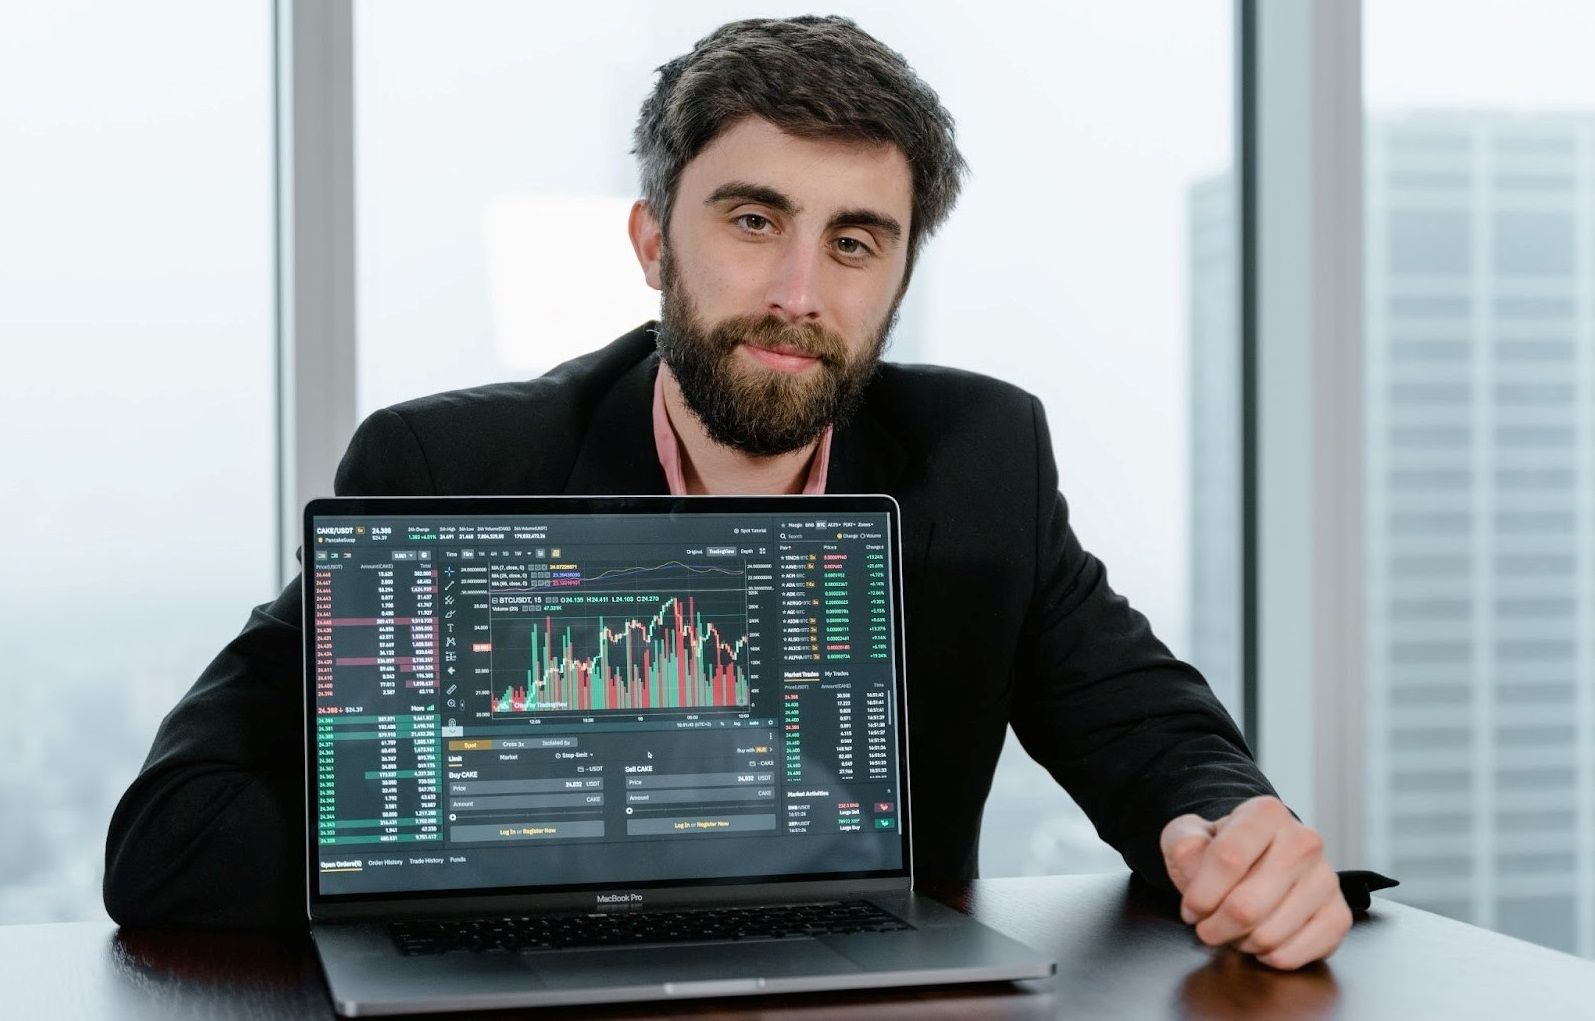 A man sits at a laptop screen and shows a cryptocurrency price chart.